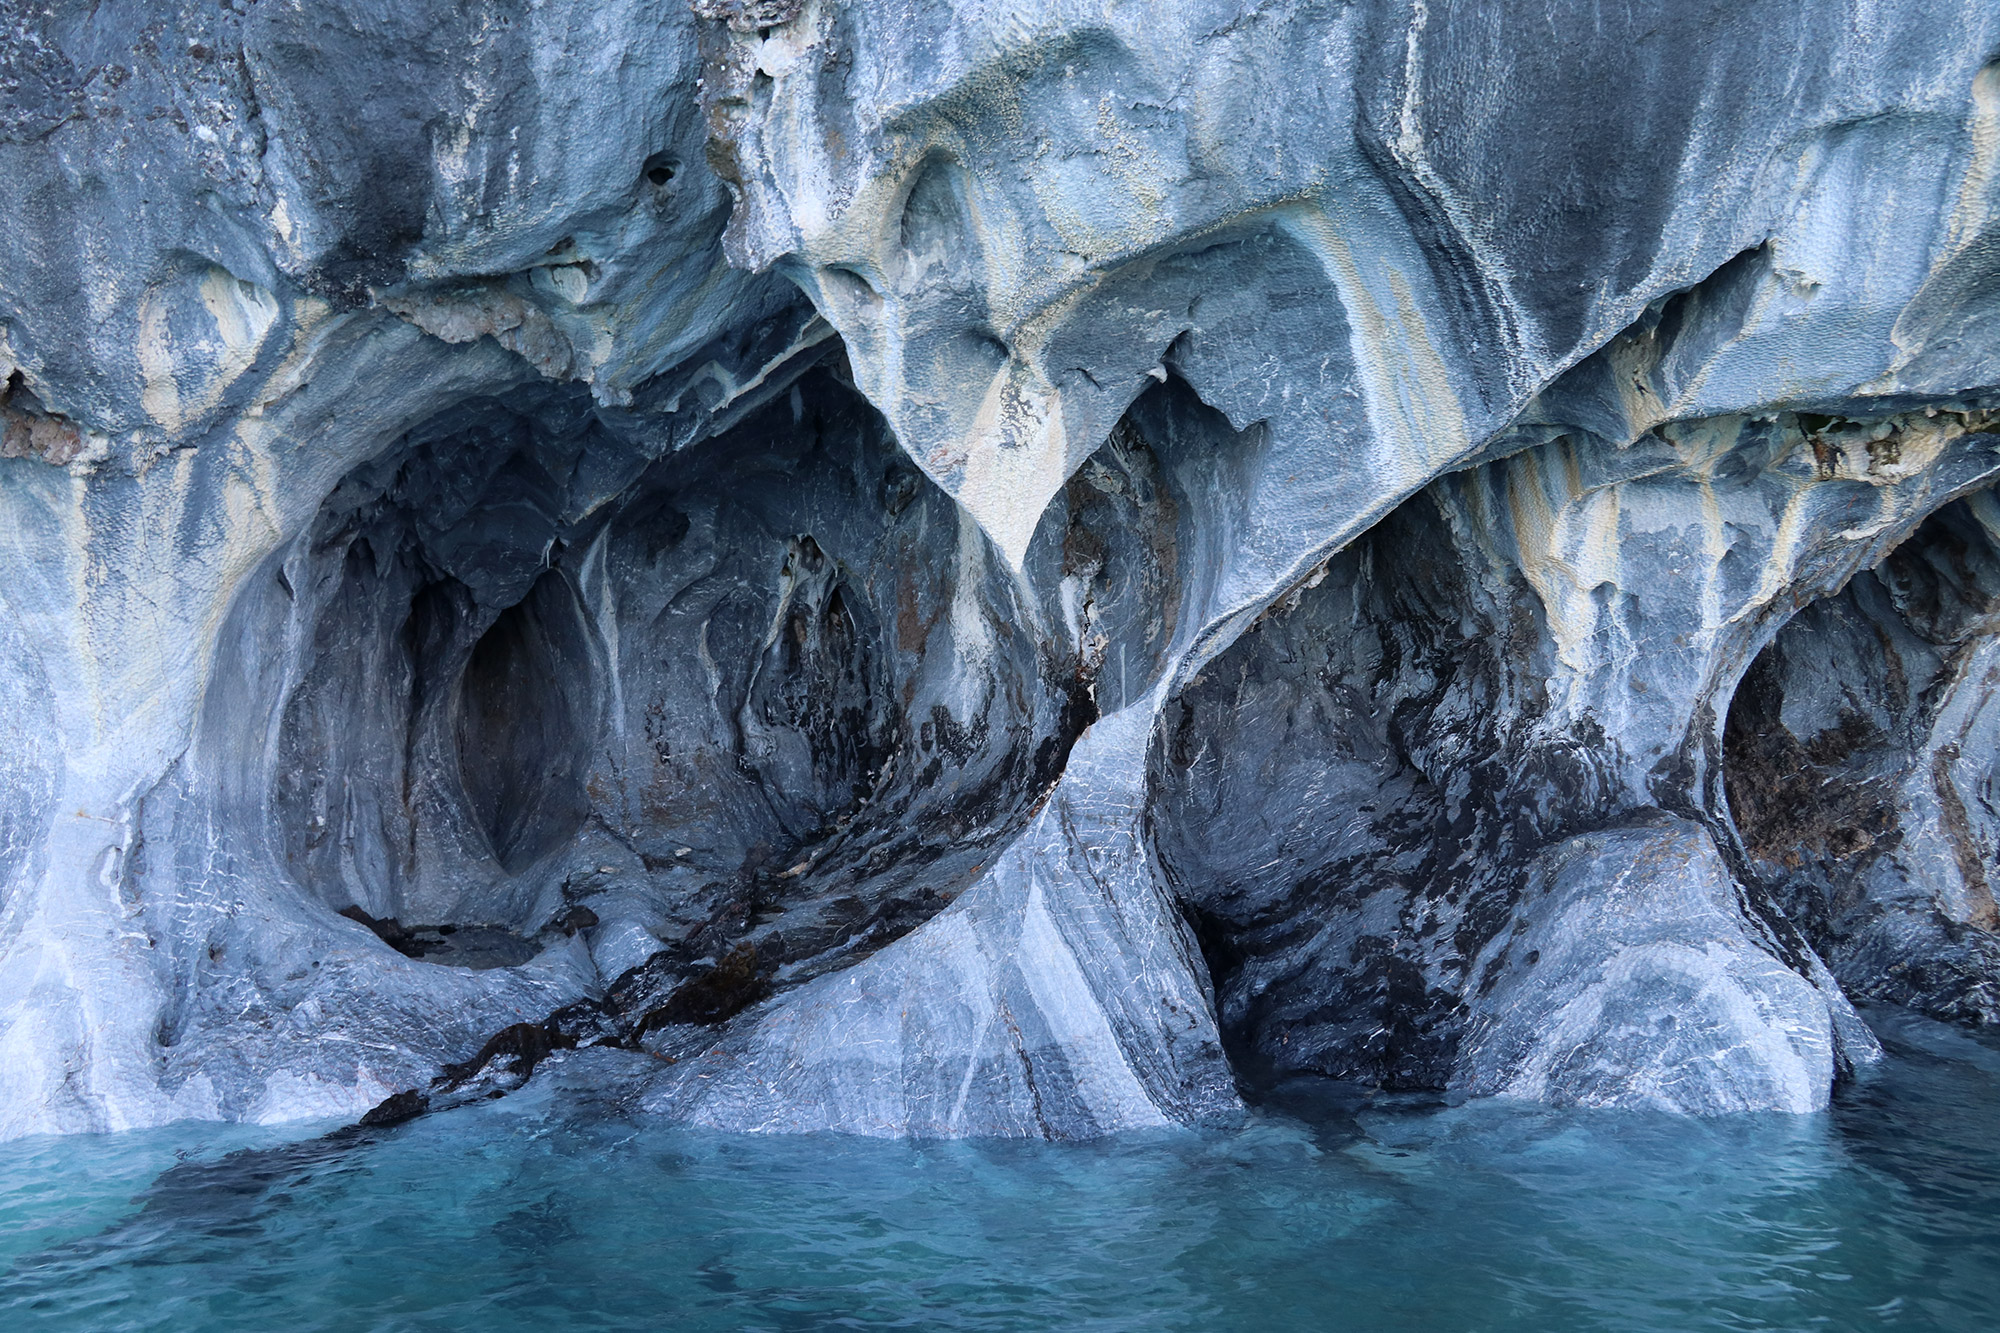 Blue Monday - Marble Caves in Chili